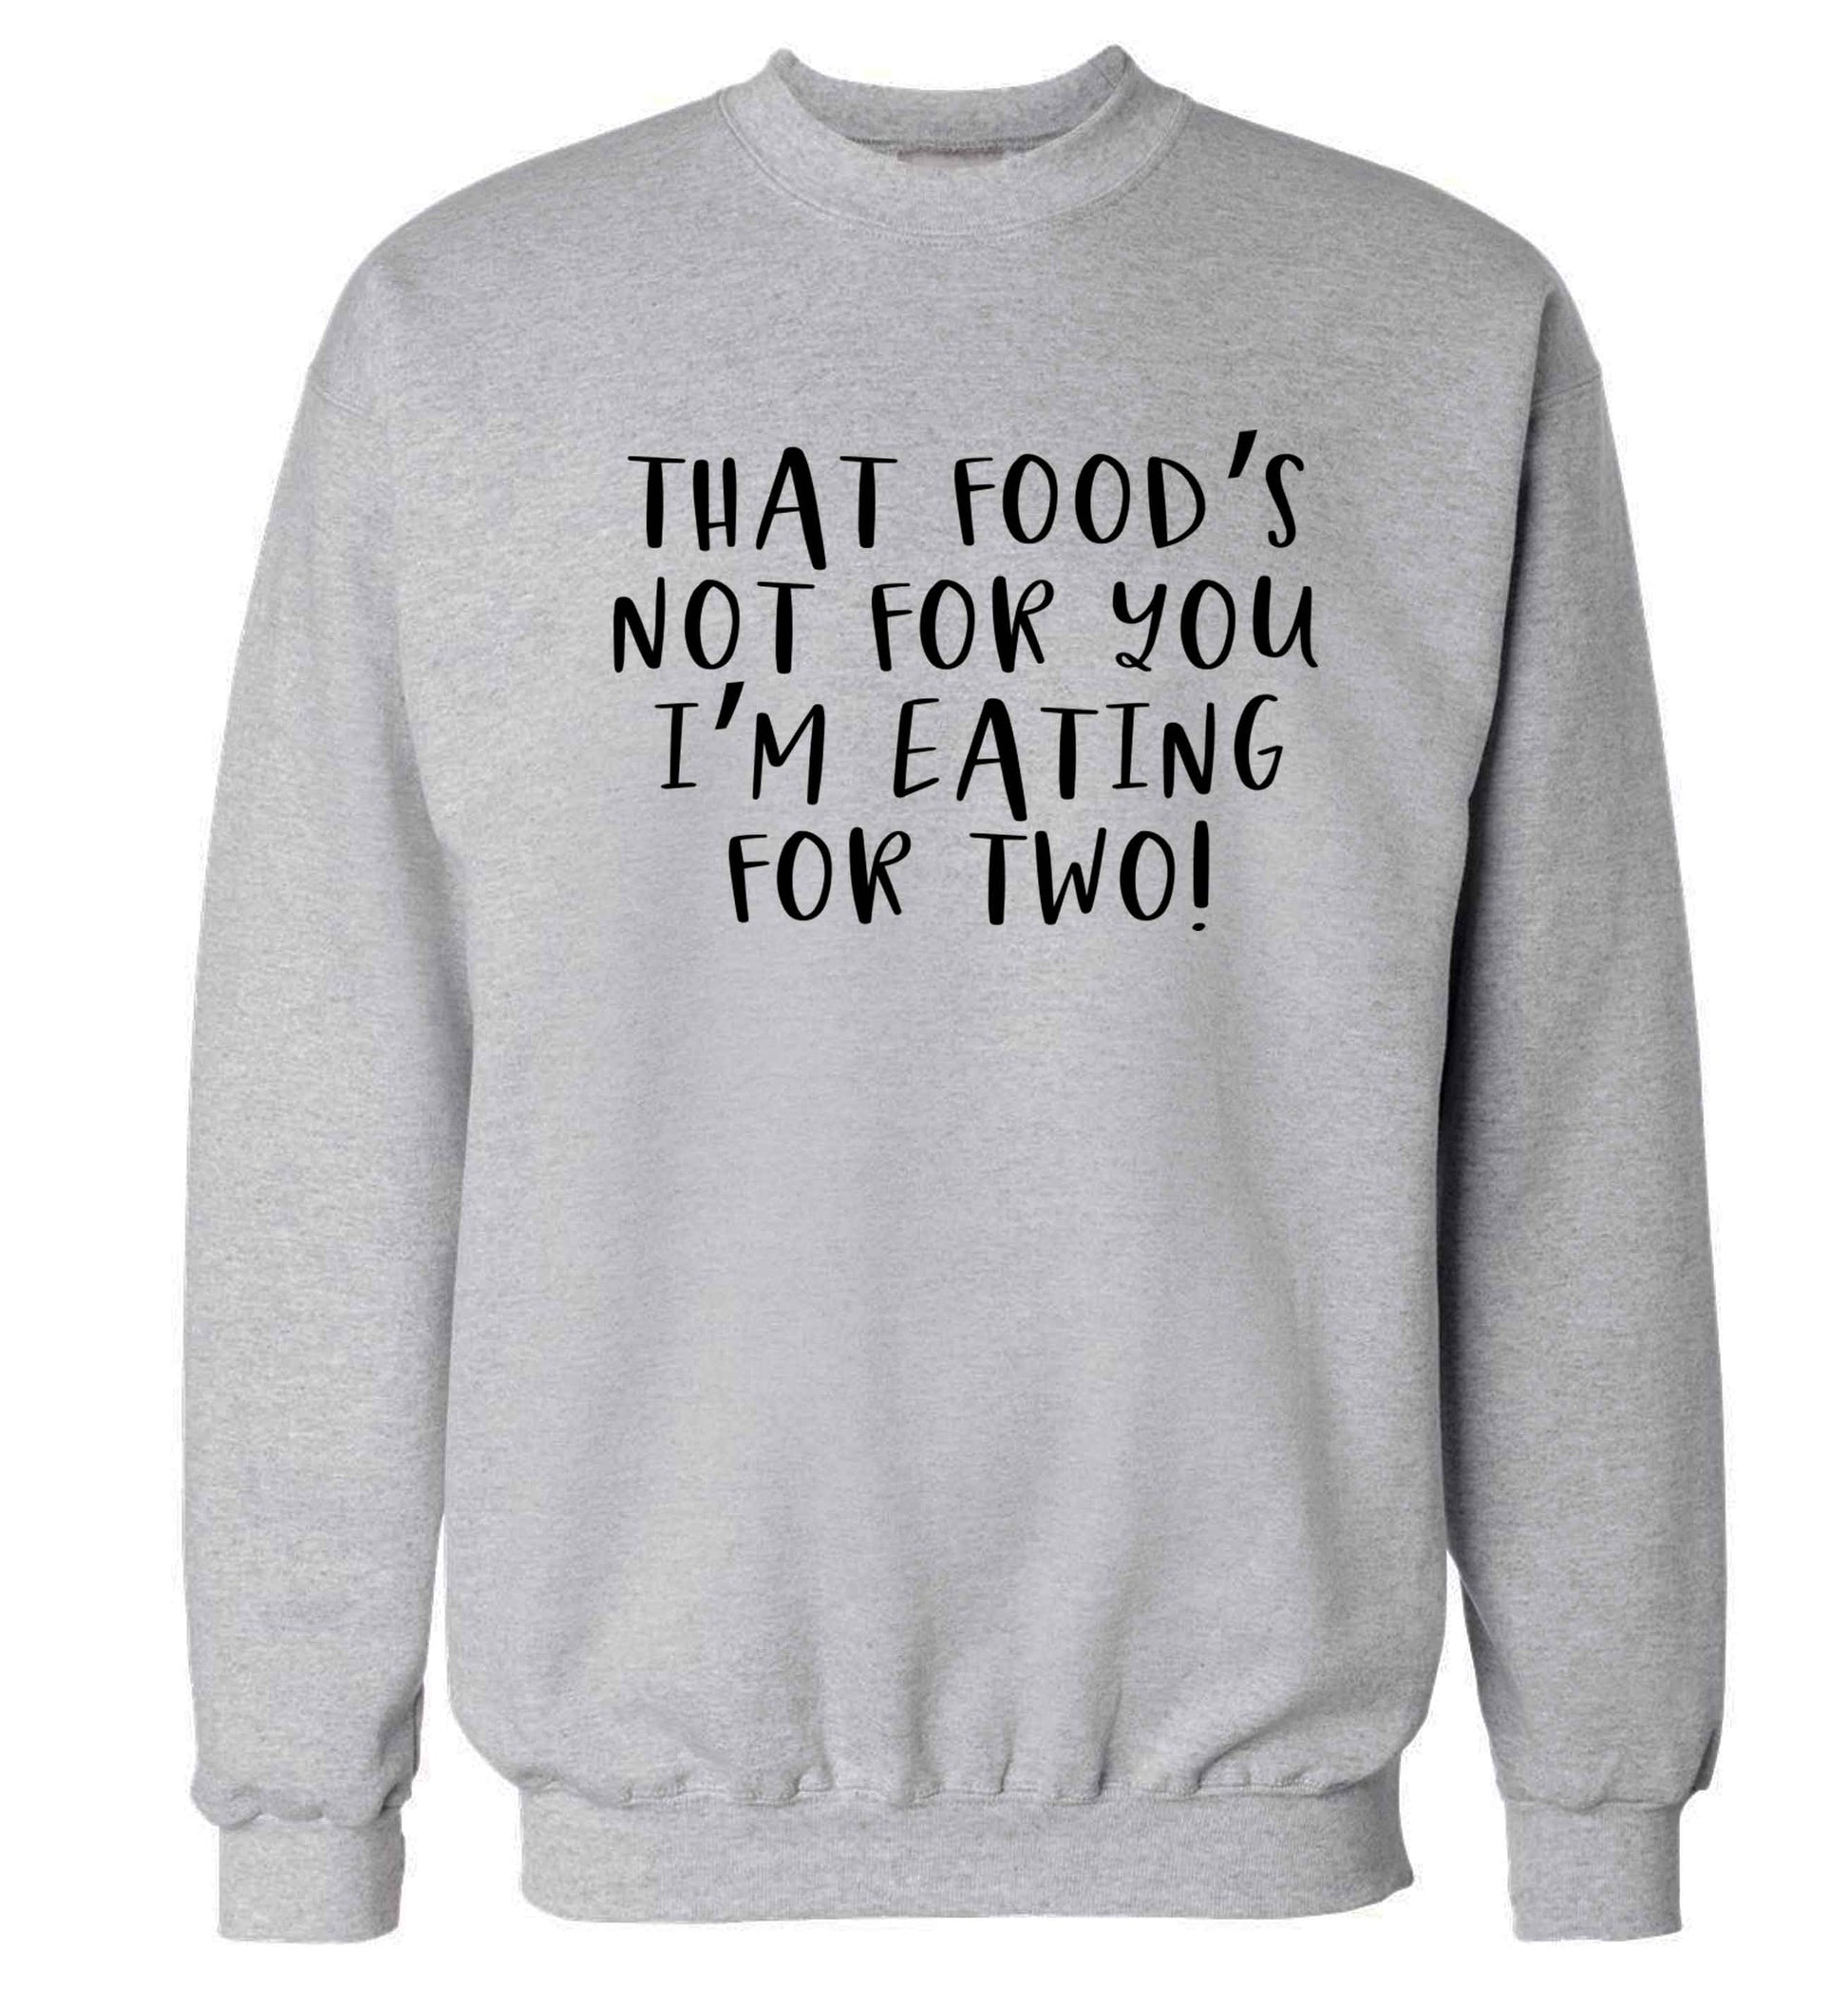 That food's not for you I'm eating for two Adult's unisex grey Sweater 2XL